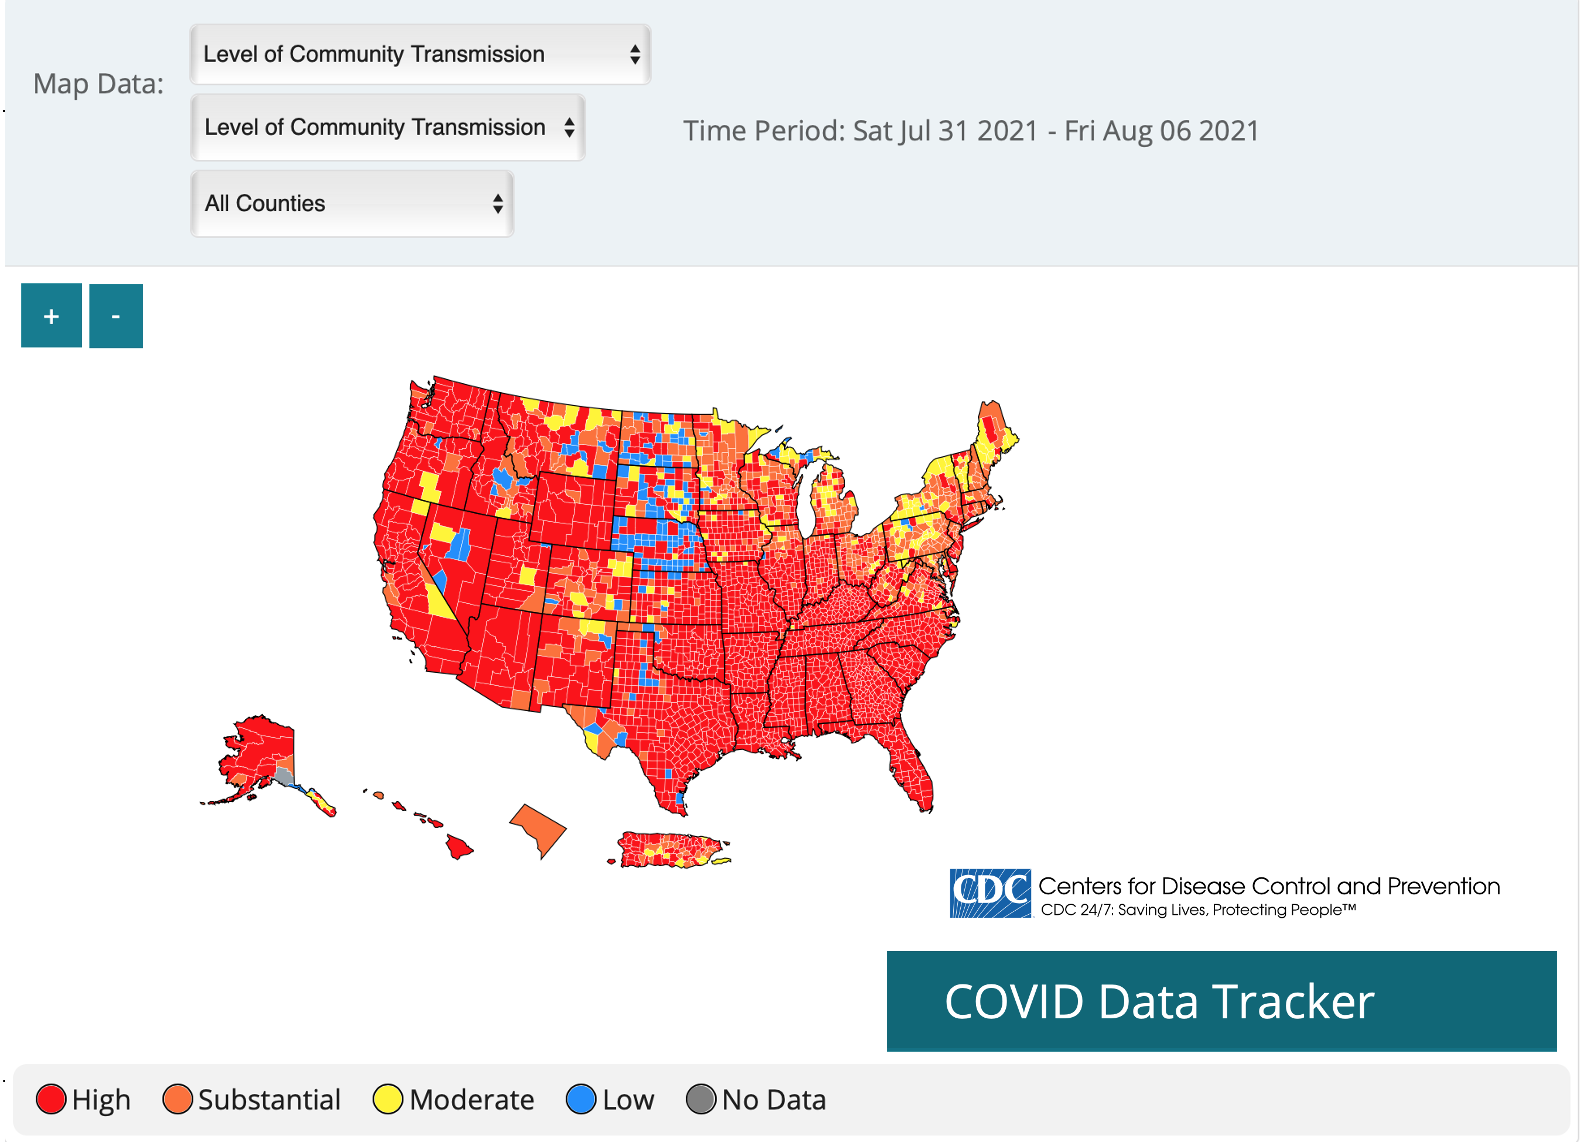 CDC map showing county-level COVID transmission